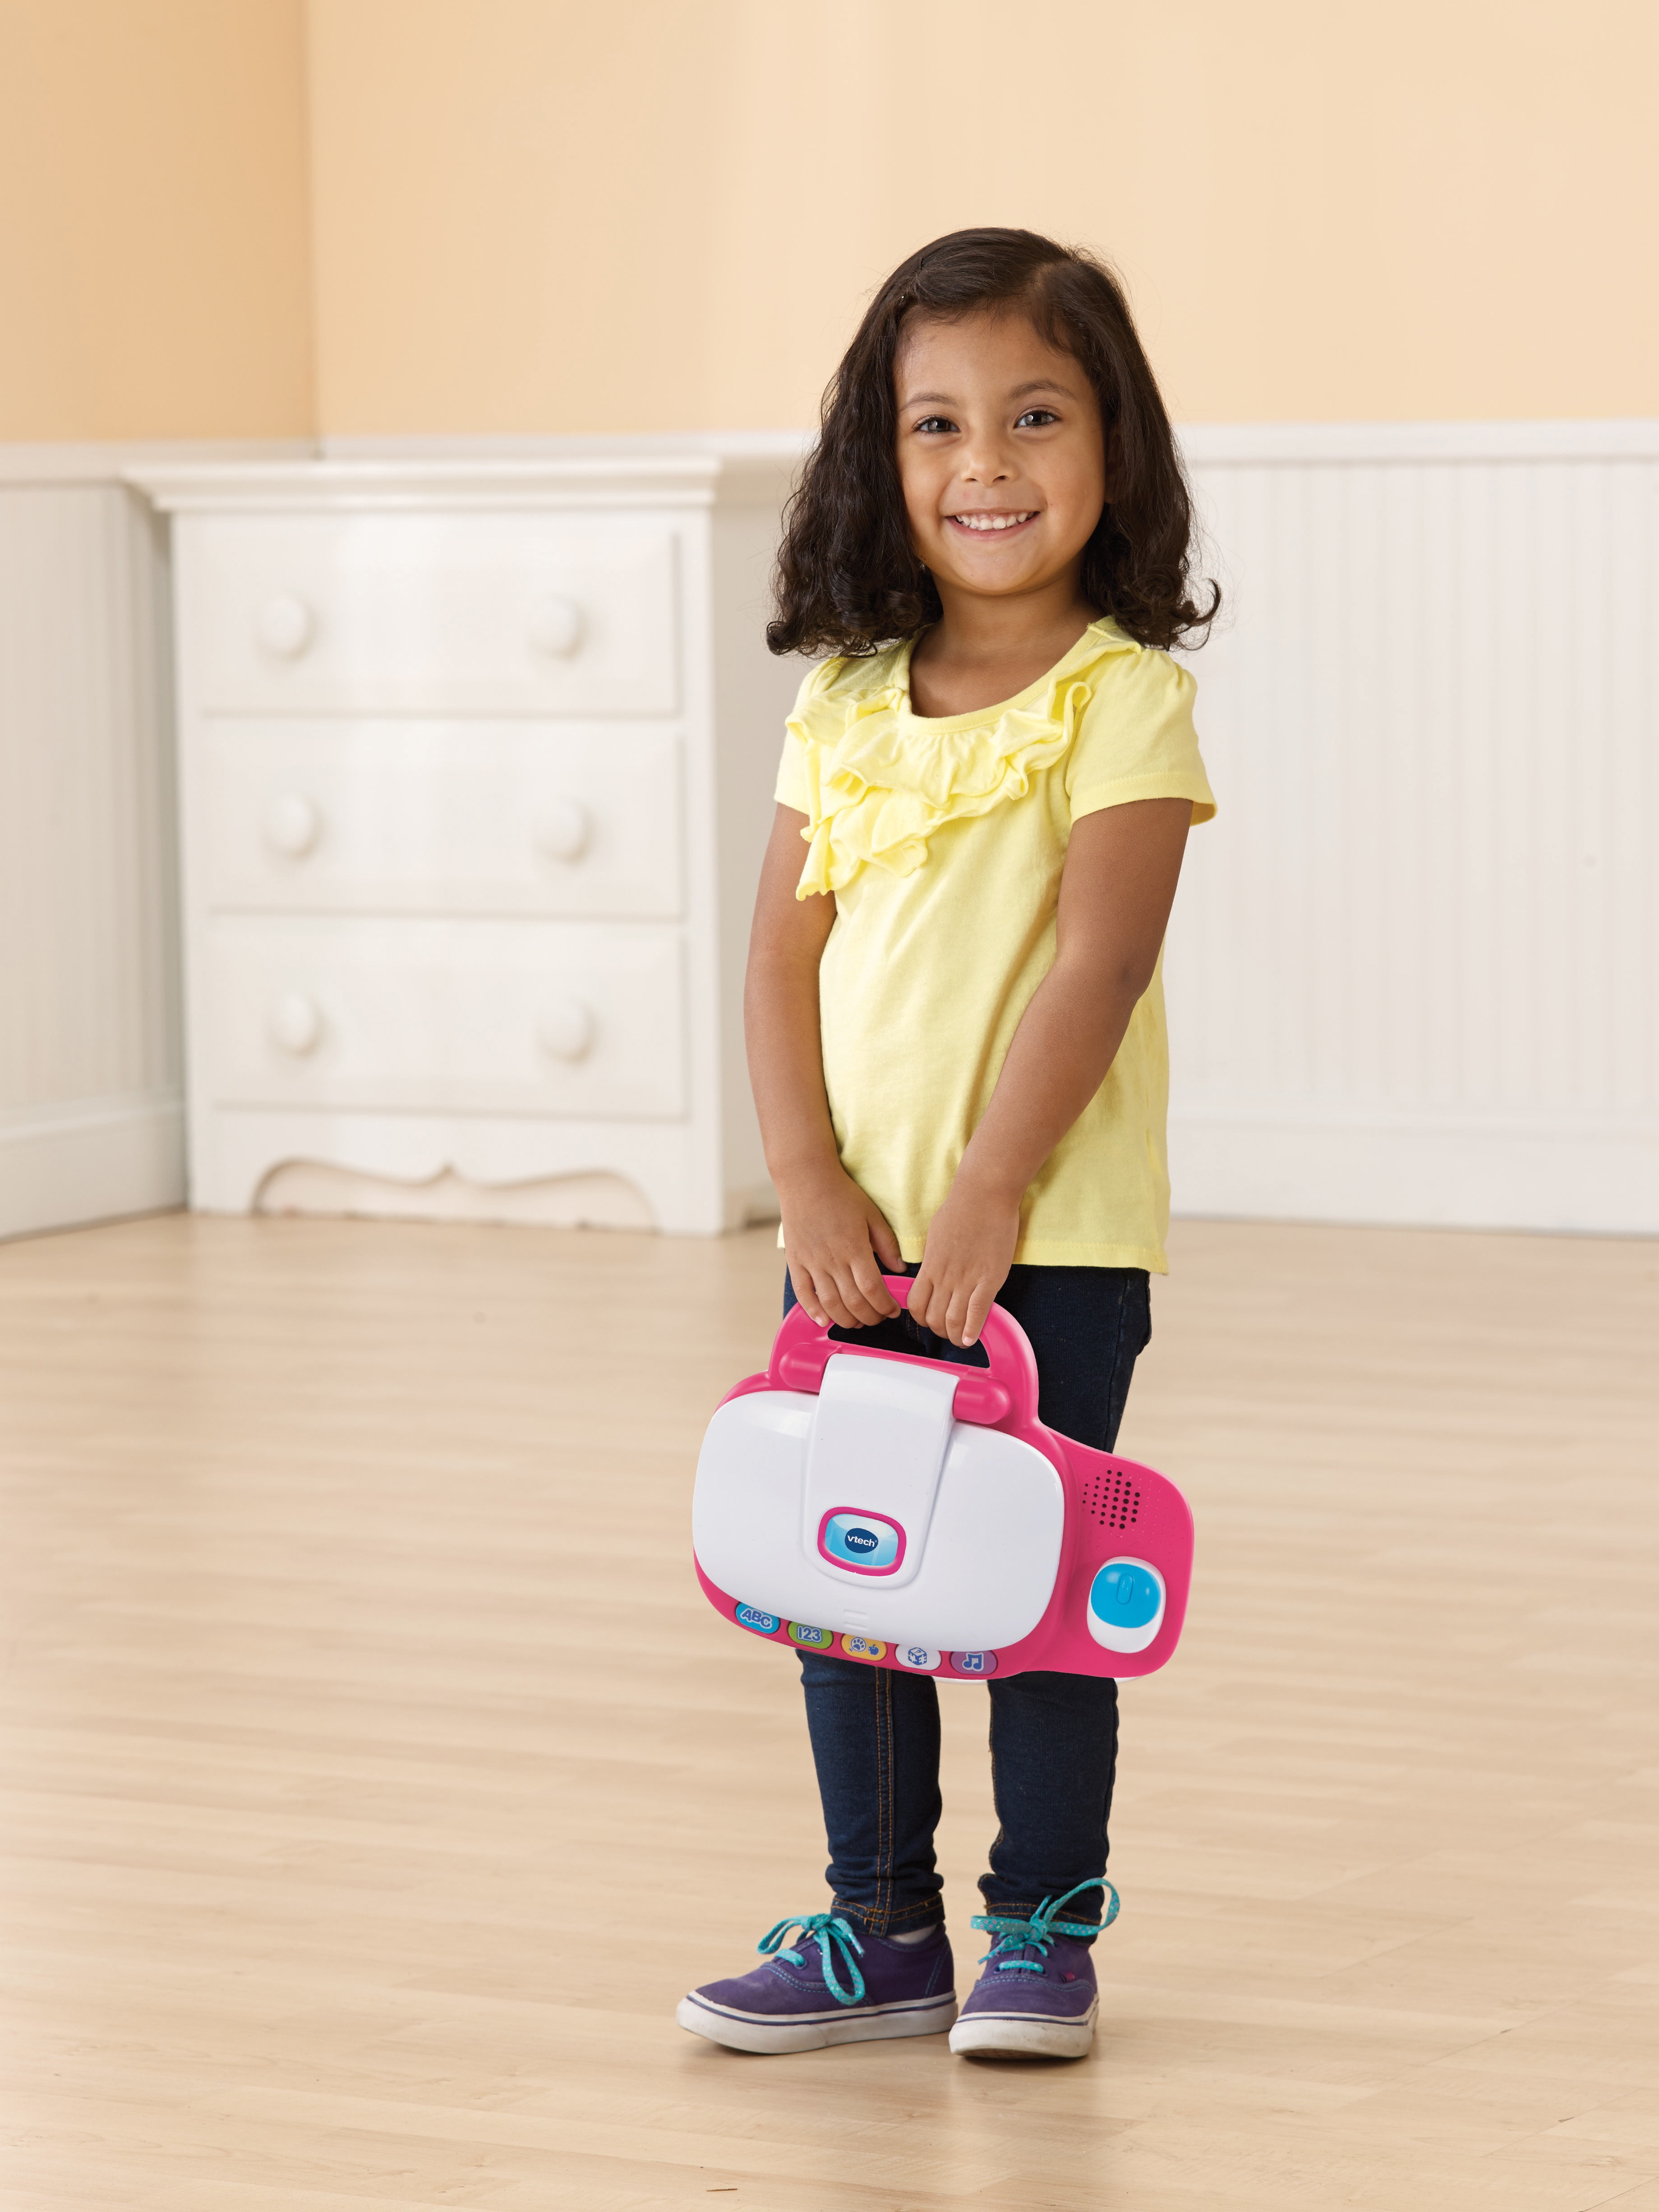 VTech - Tote & Go Laptop with Web Connect - Pink